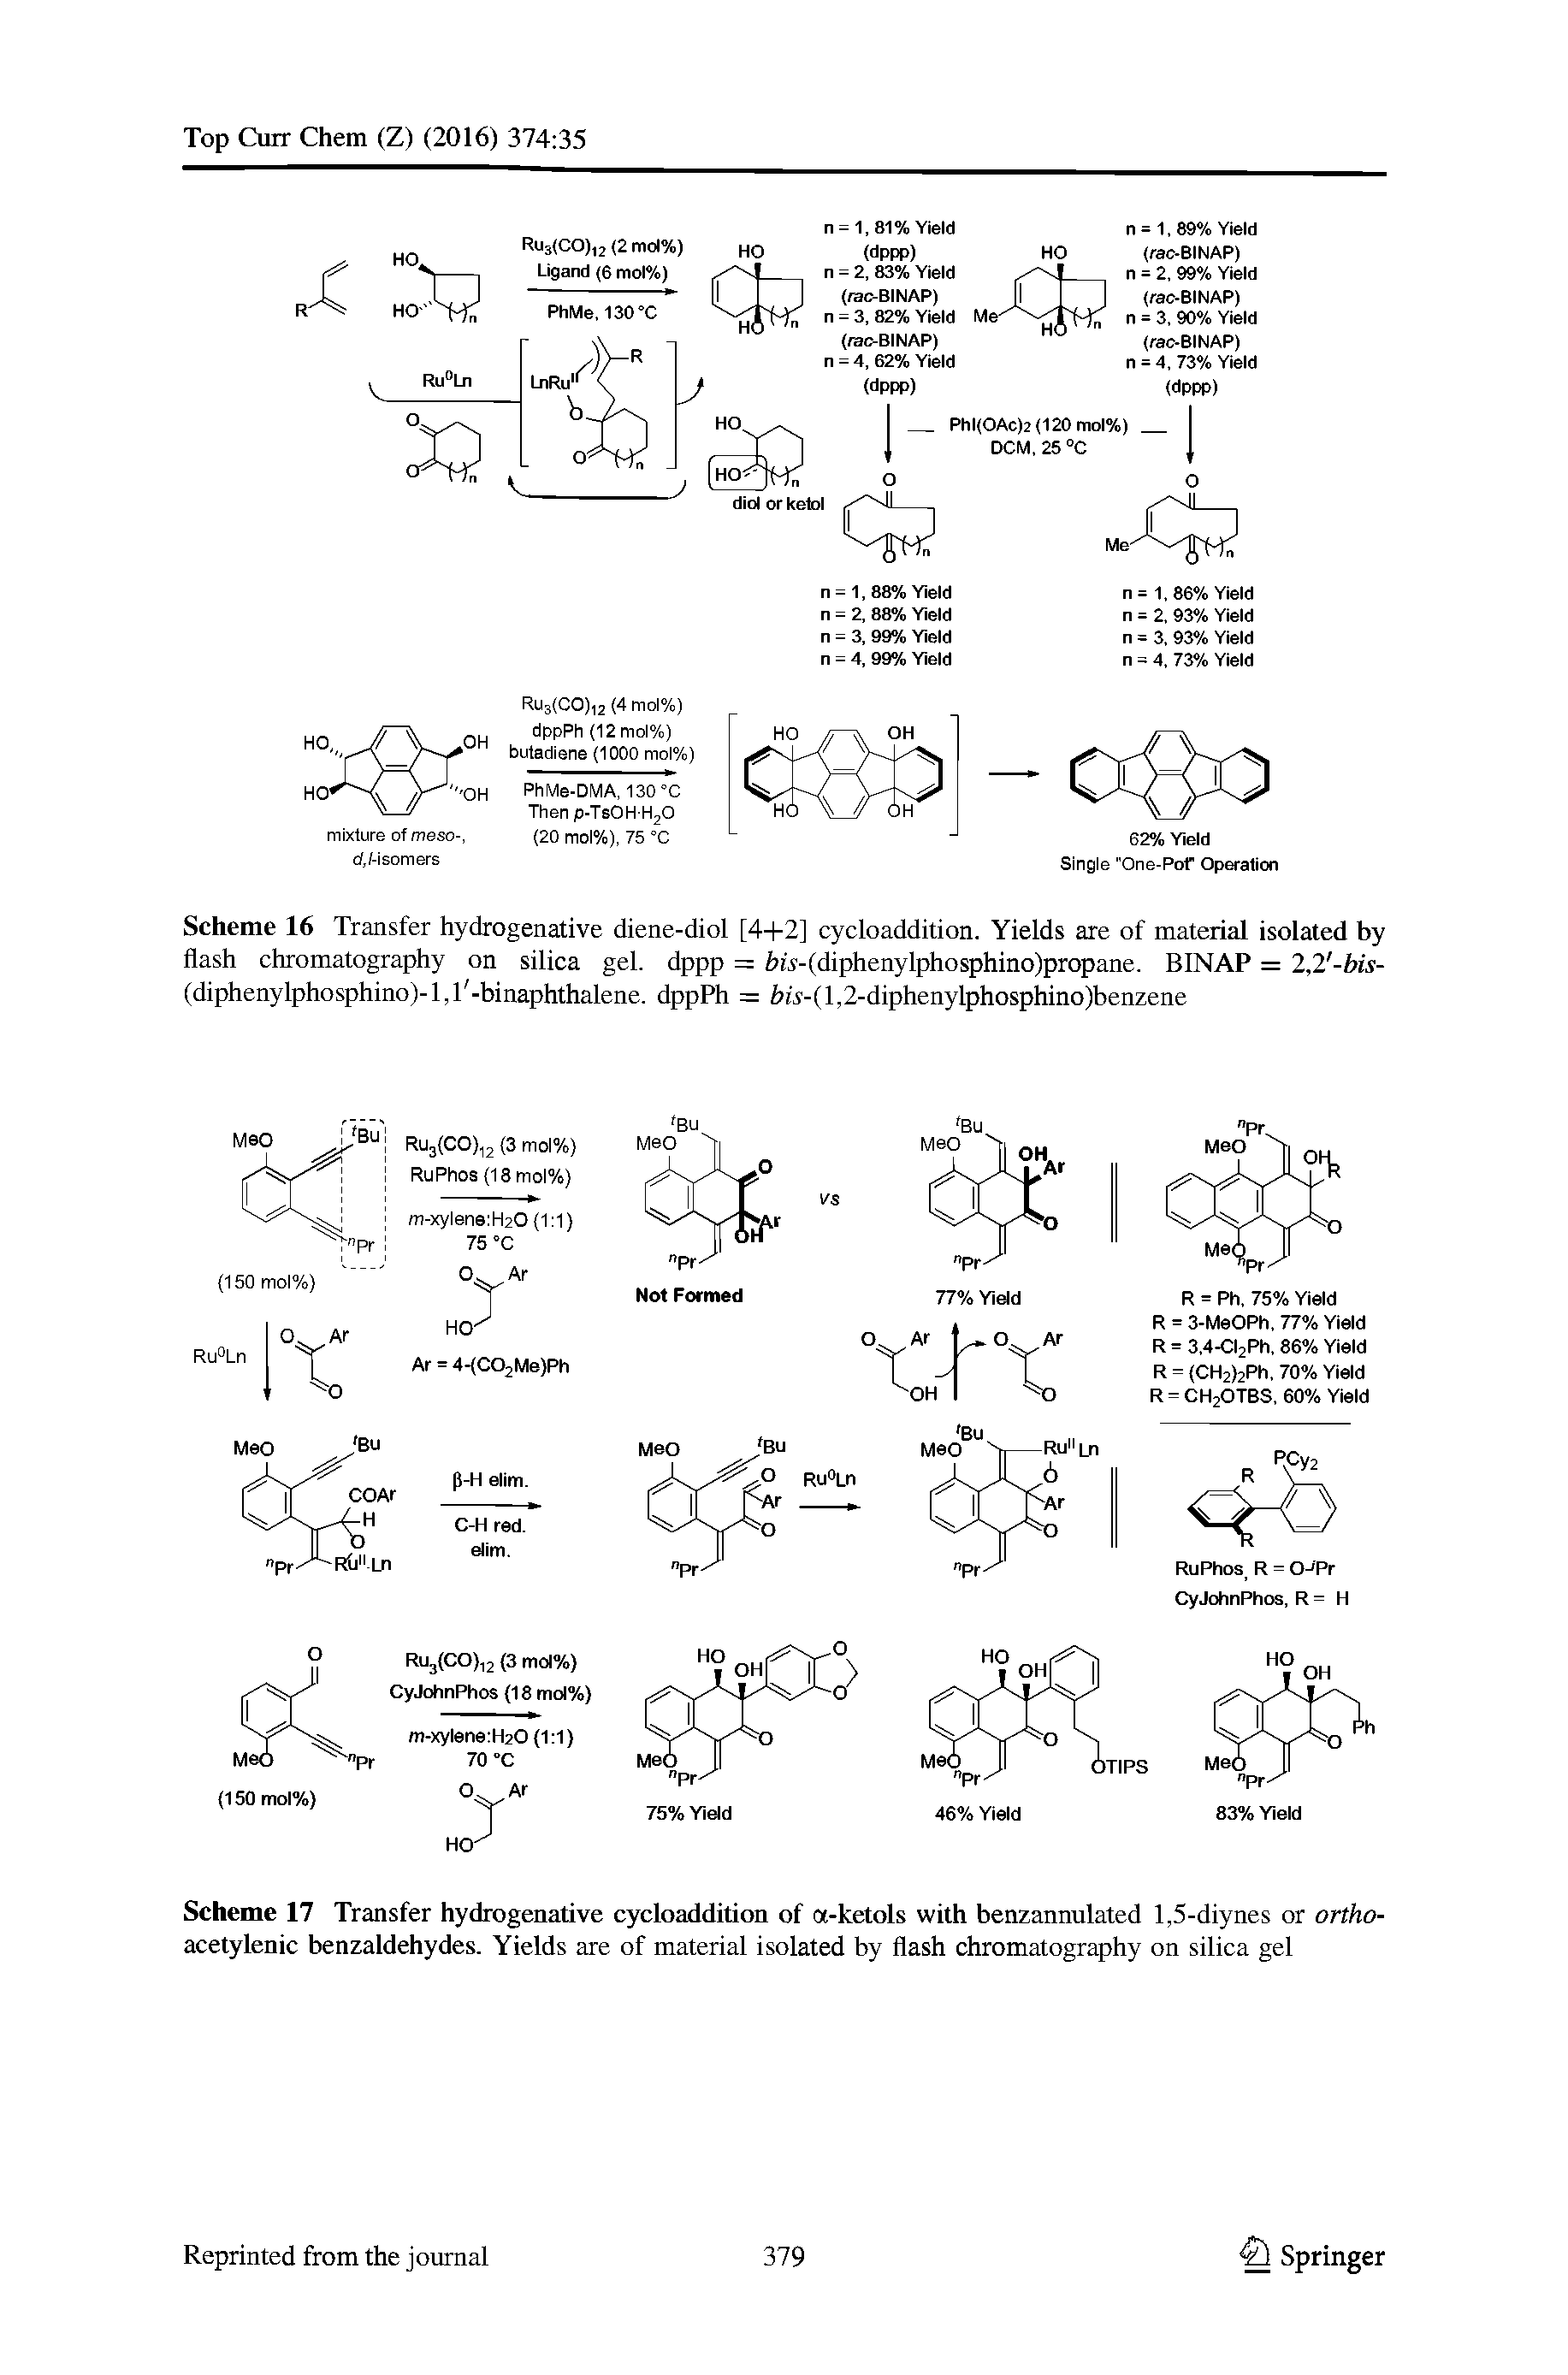 Scheme 16 Transfer hydrogenative diene-diol [4+2] cycloaddition. Yields are of material isolated by flash chromatography on silica gel. dppp = w-(diphenylphosphino)propane. BINAP = 2,2 -bis-(diphenylphosphino)-l,l -binaphthalene. dppPh = />(l,2-diphenylphosphino)benzene...